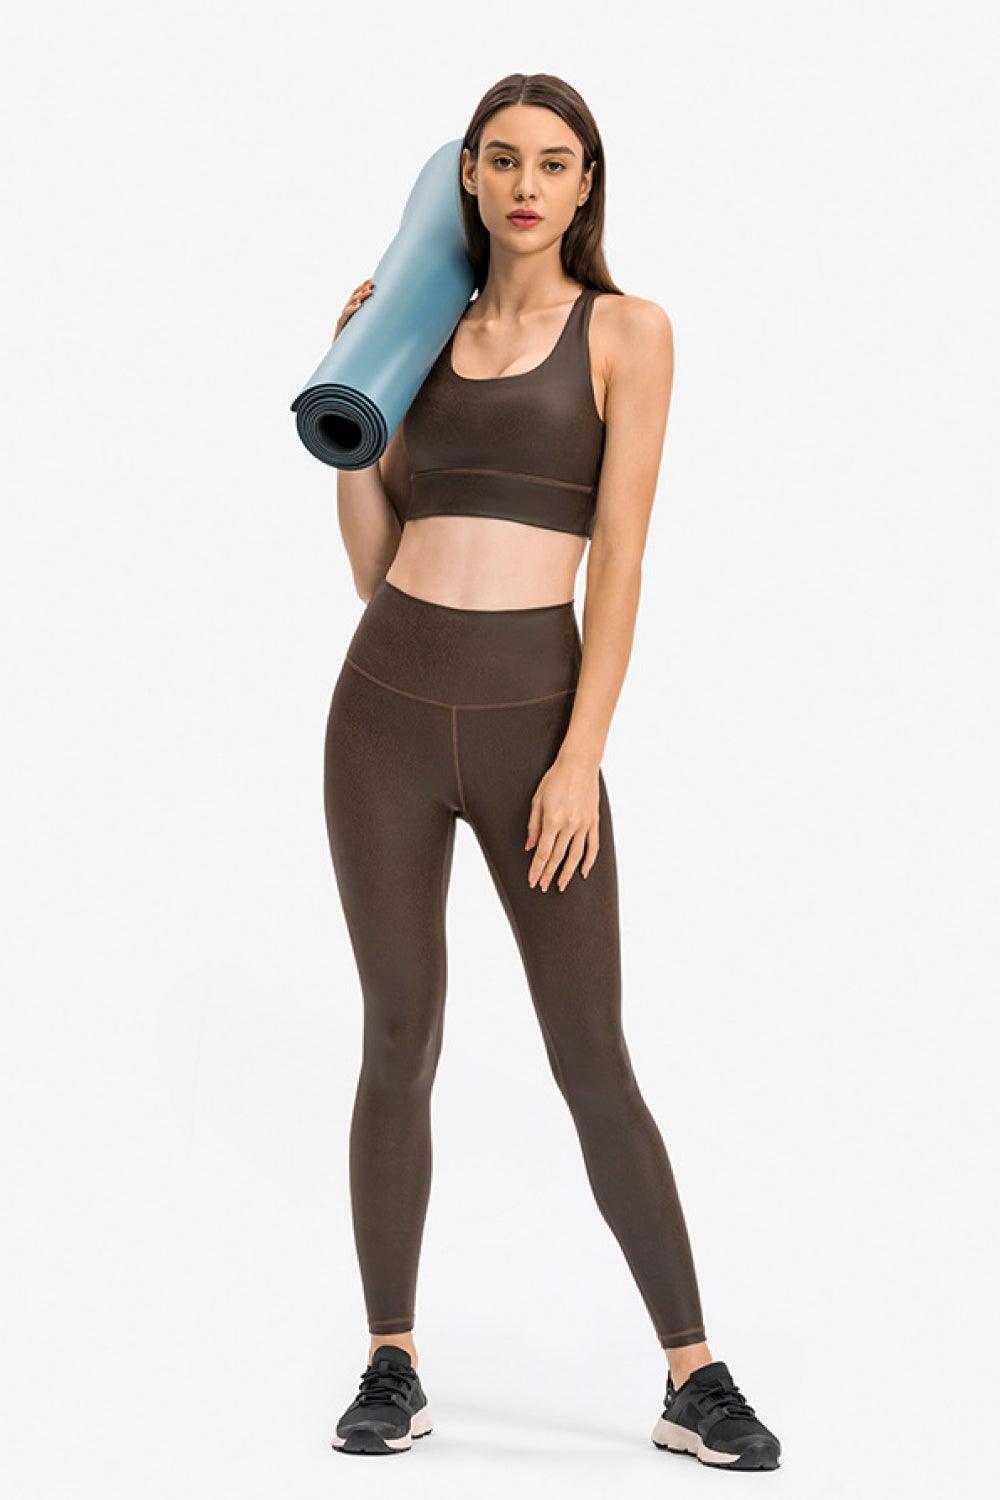 Invisible Pocket Yoga Leggings - Personal Hour for Yoga and Meditations 